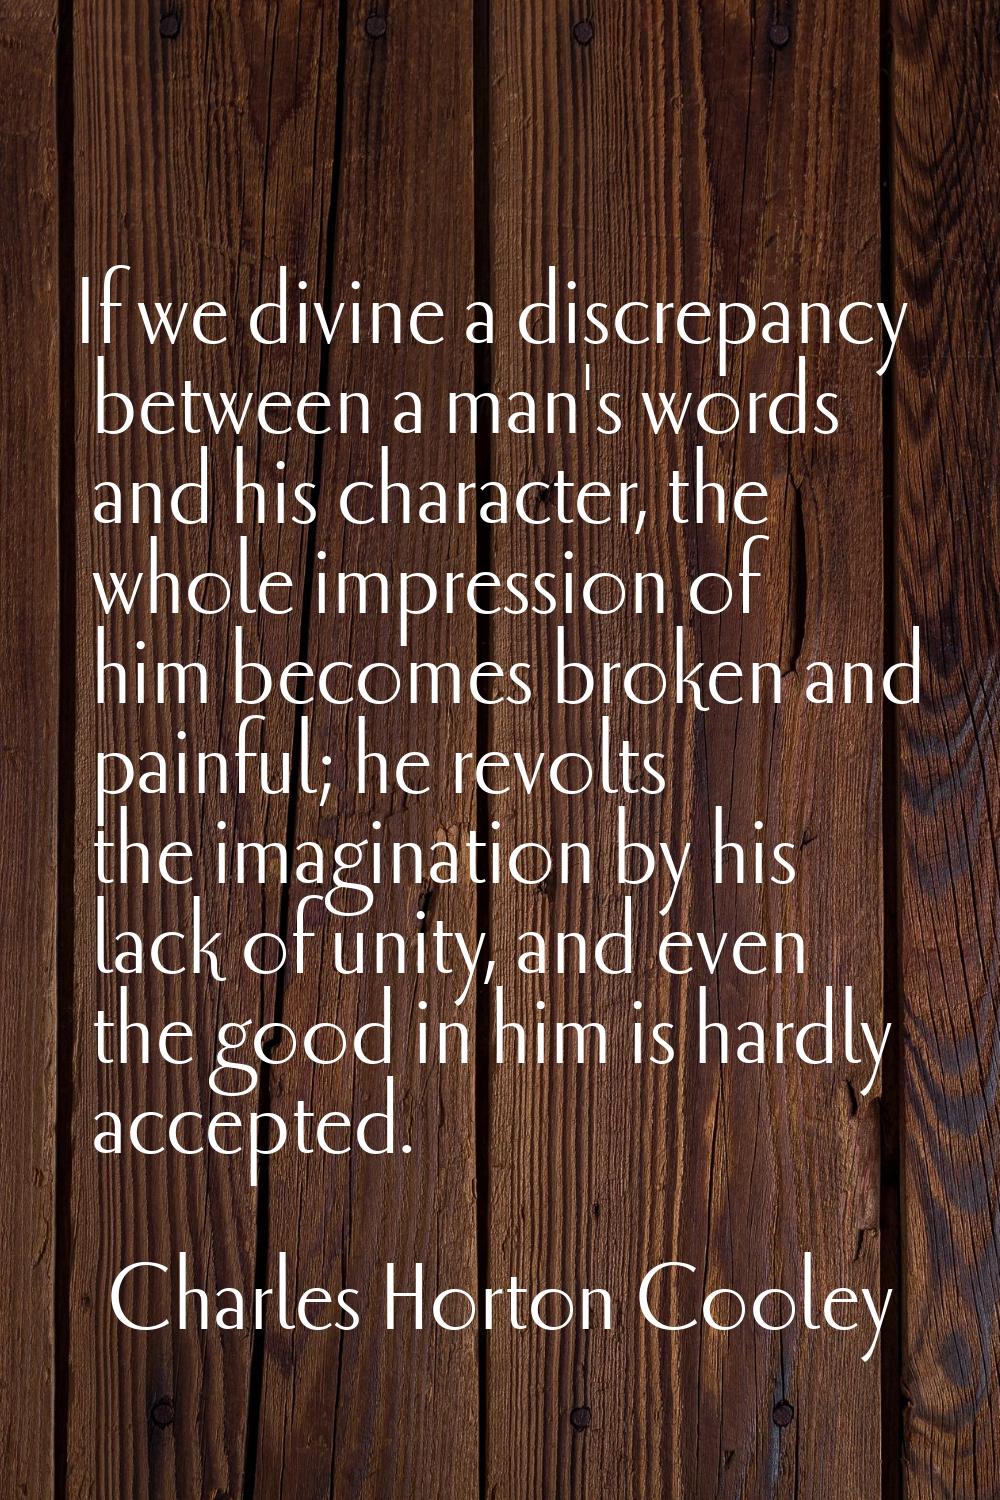 If we divine a discrepancy between a man's words and his character, the whole impression of him bec